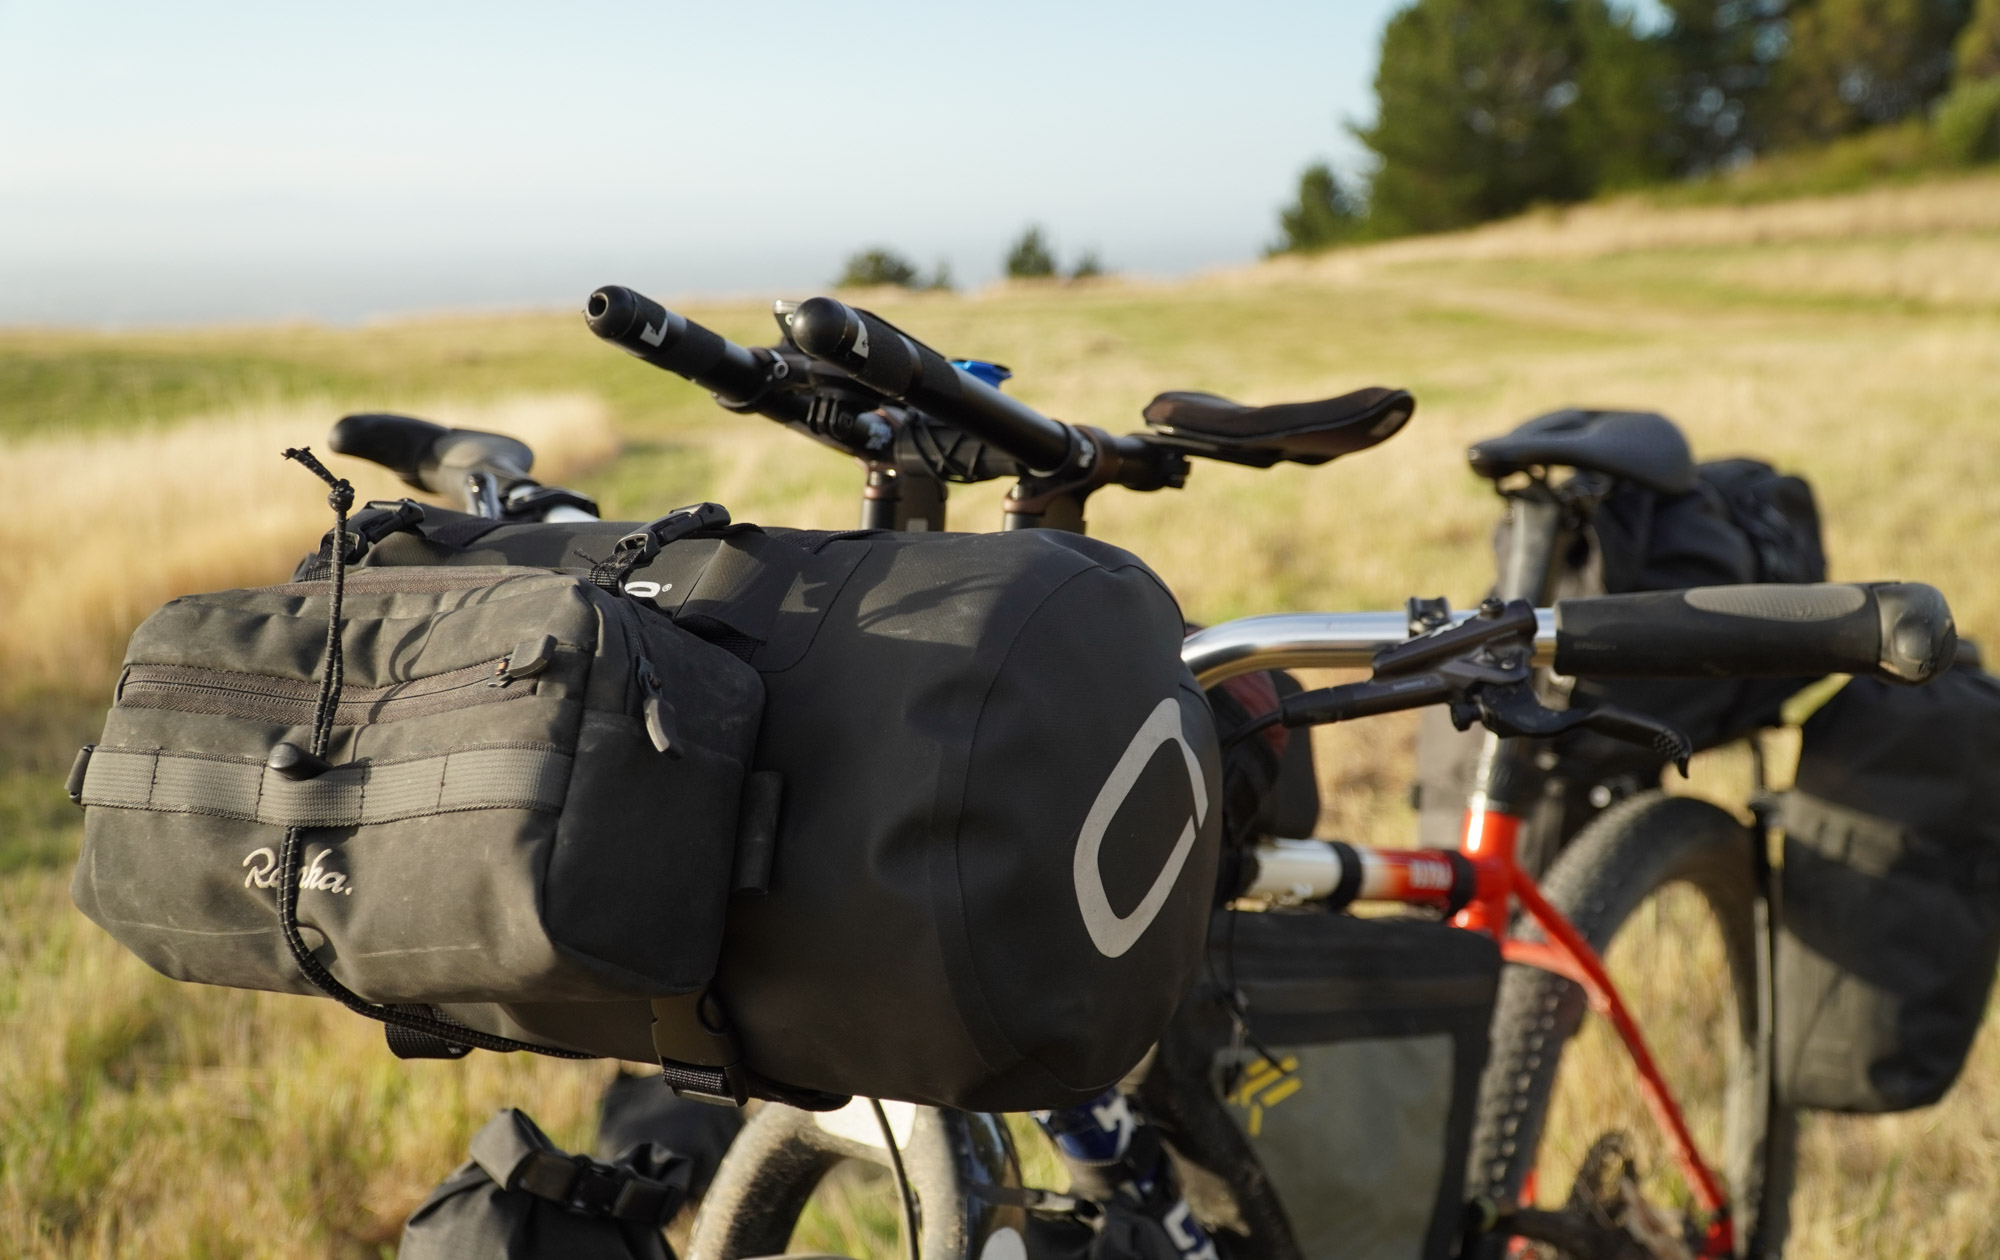 The Rapha handlebar bag is cinched down over another bag on the front of the bike, just below the aero extensions.